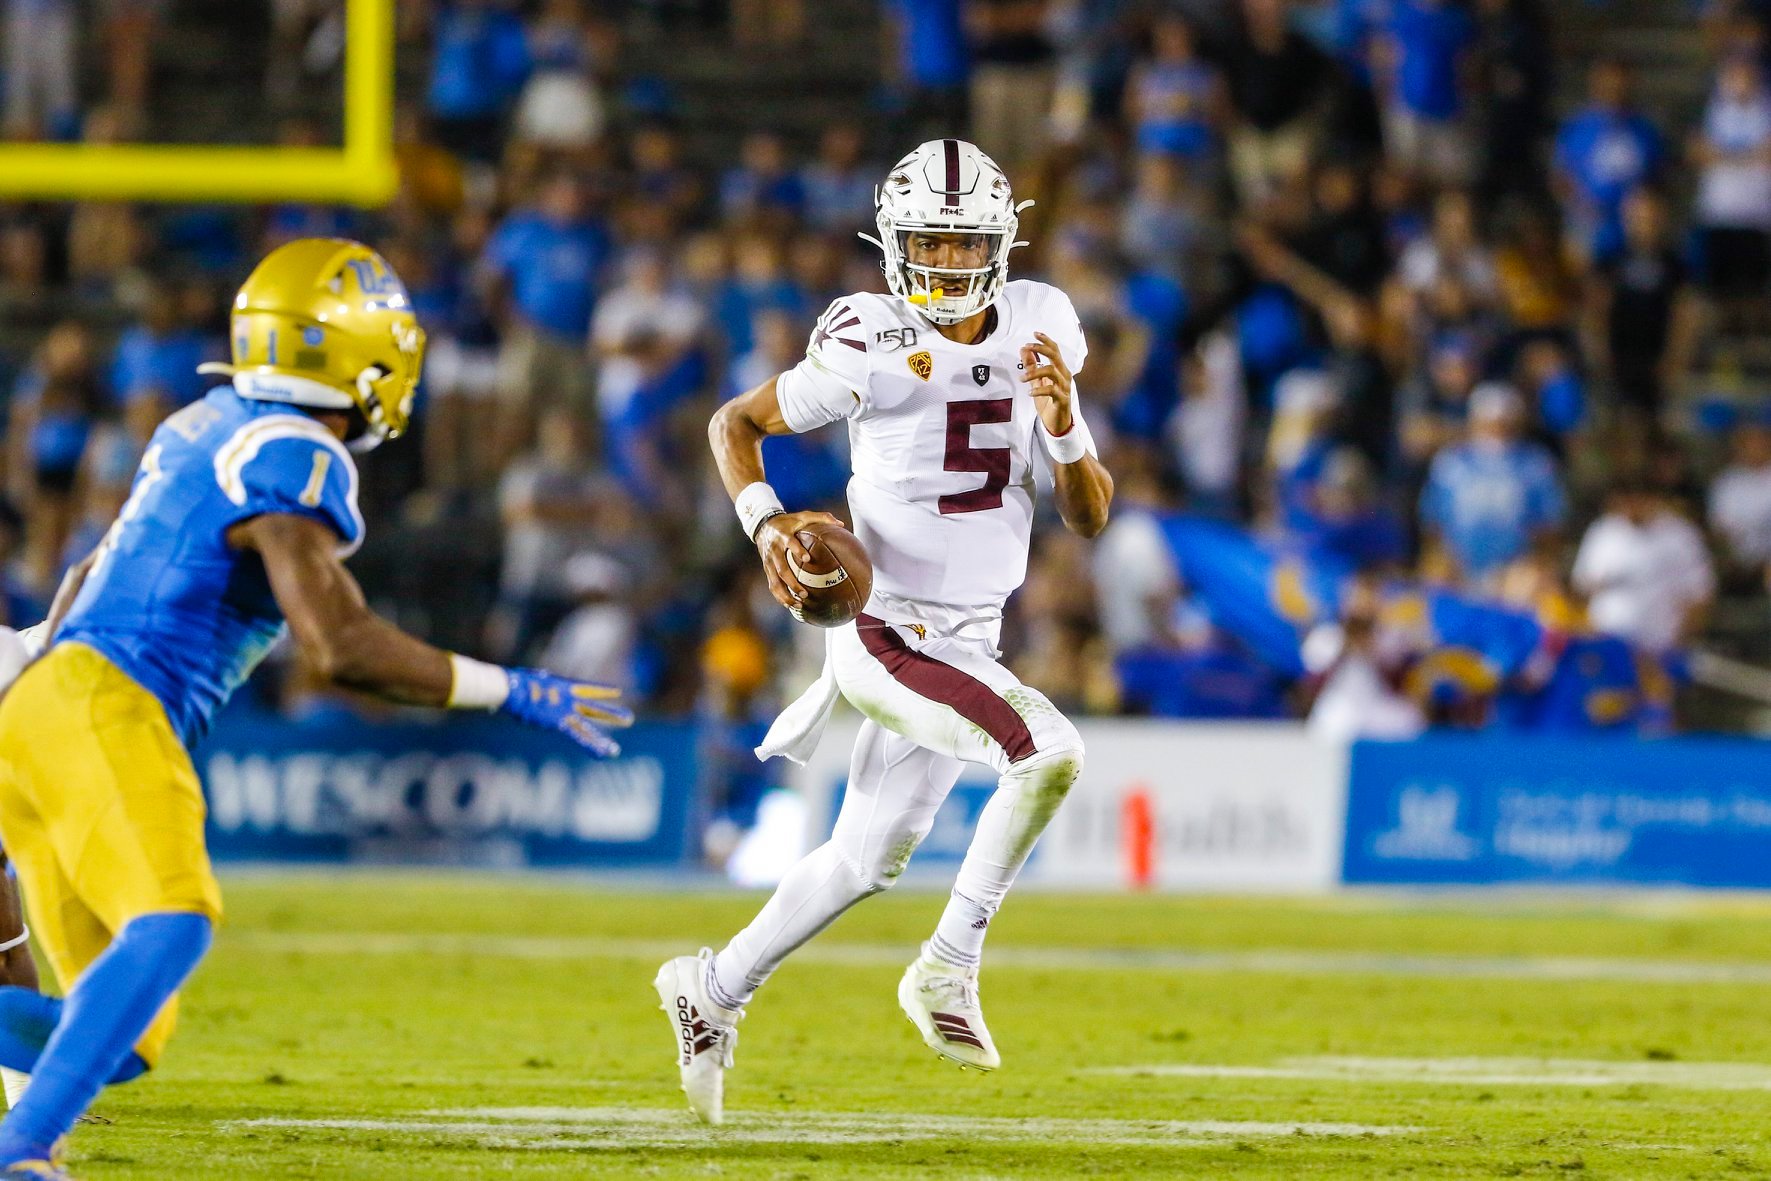 ASU Football Sun Devils return to action against UCLA after layoff